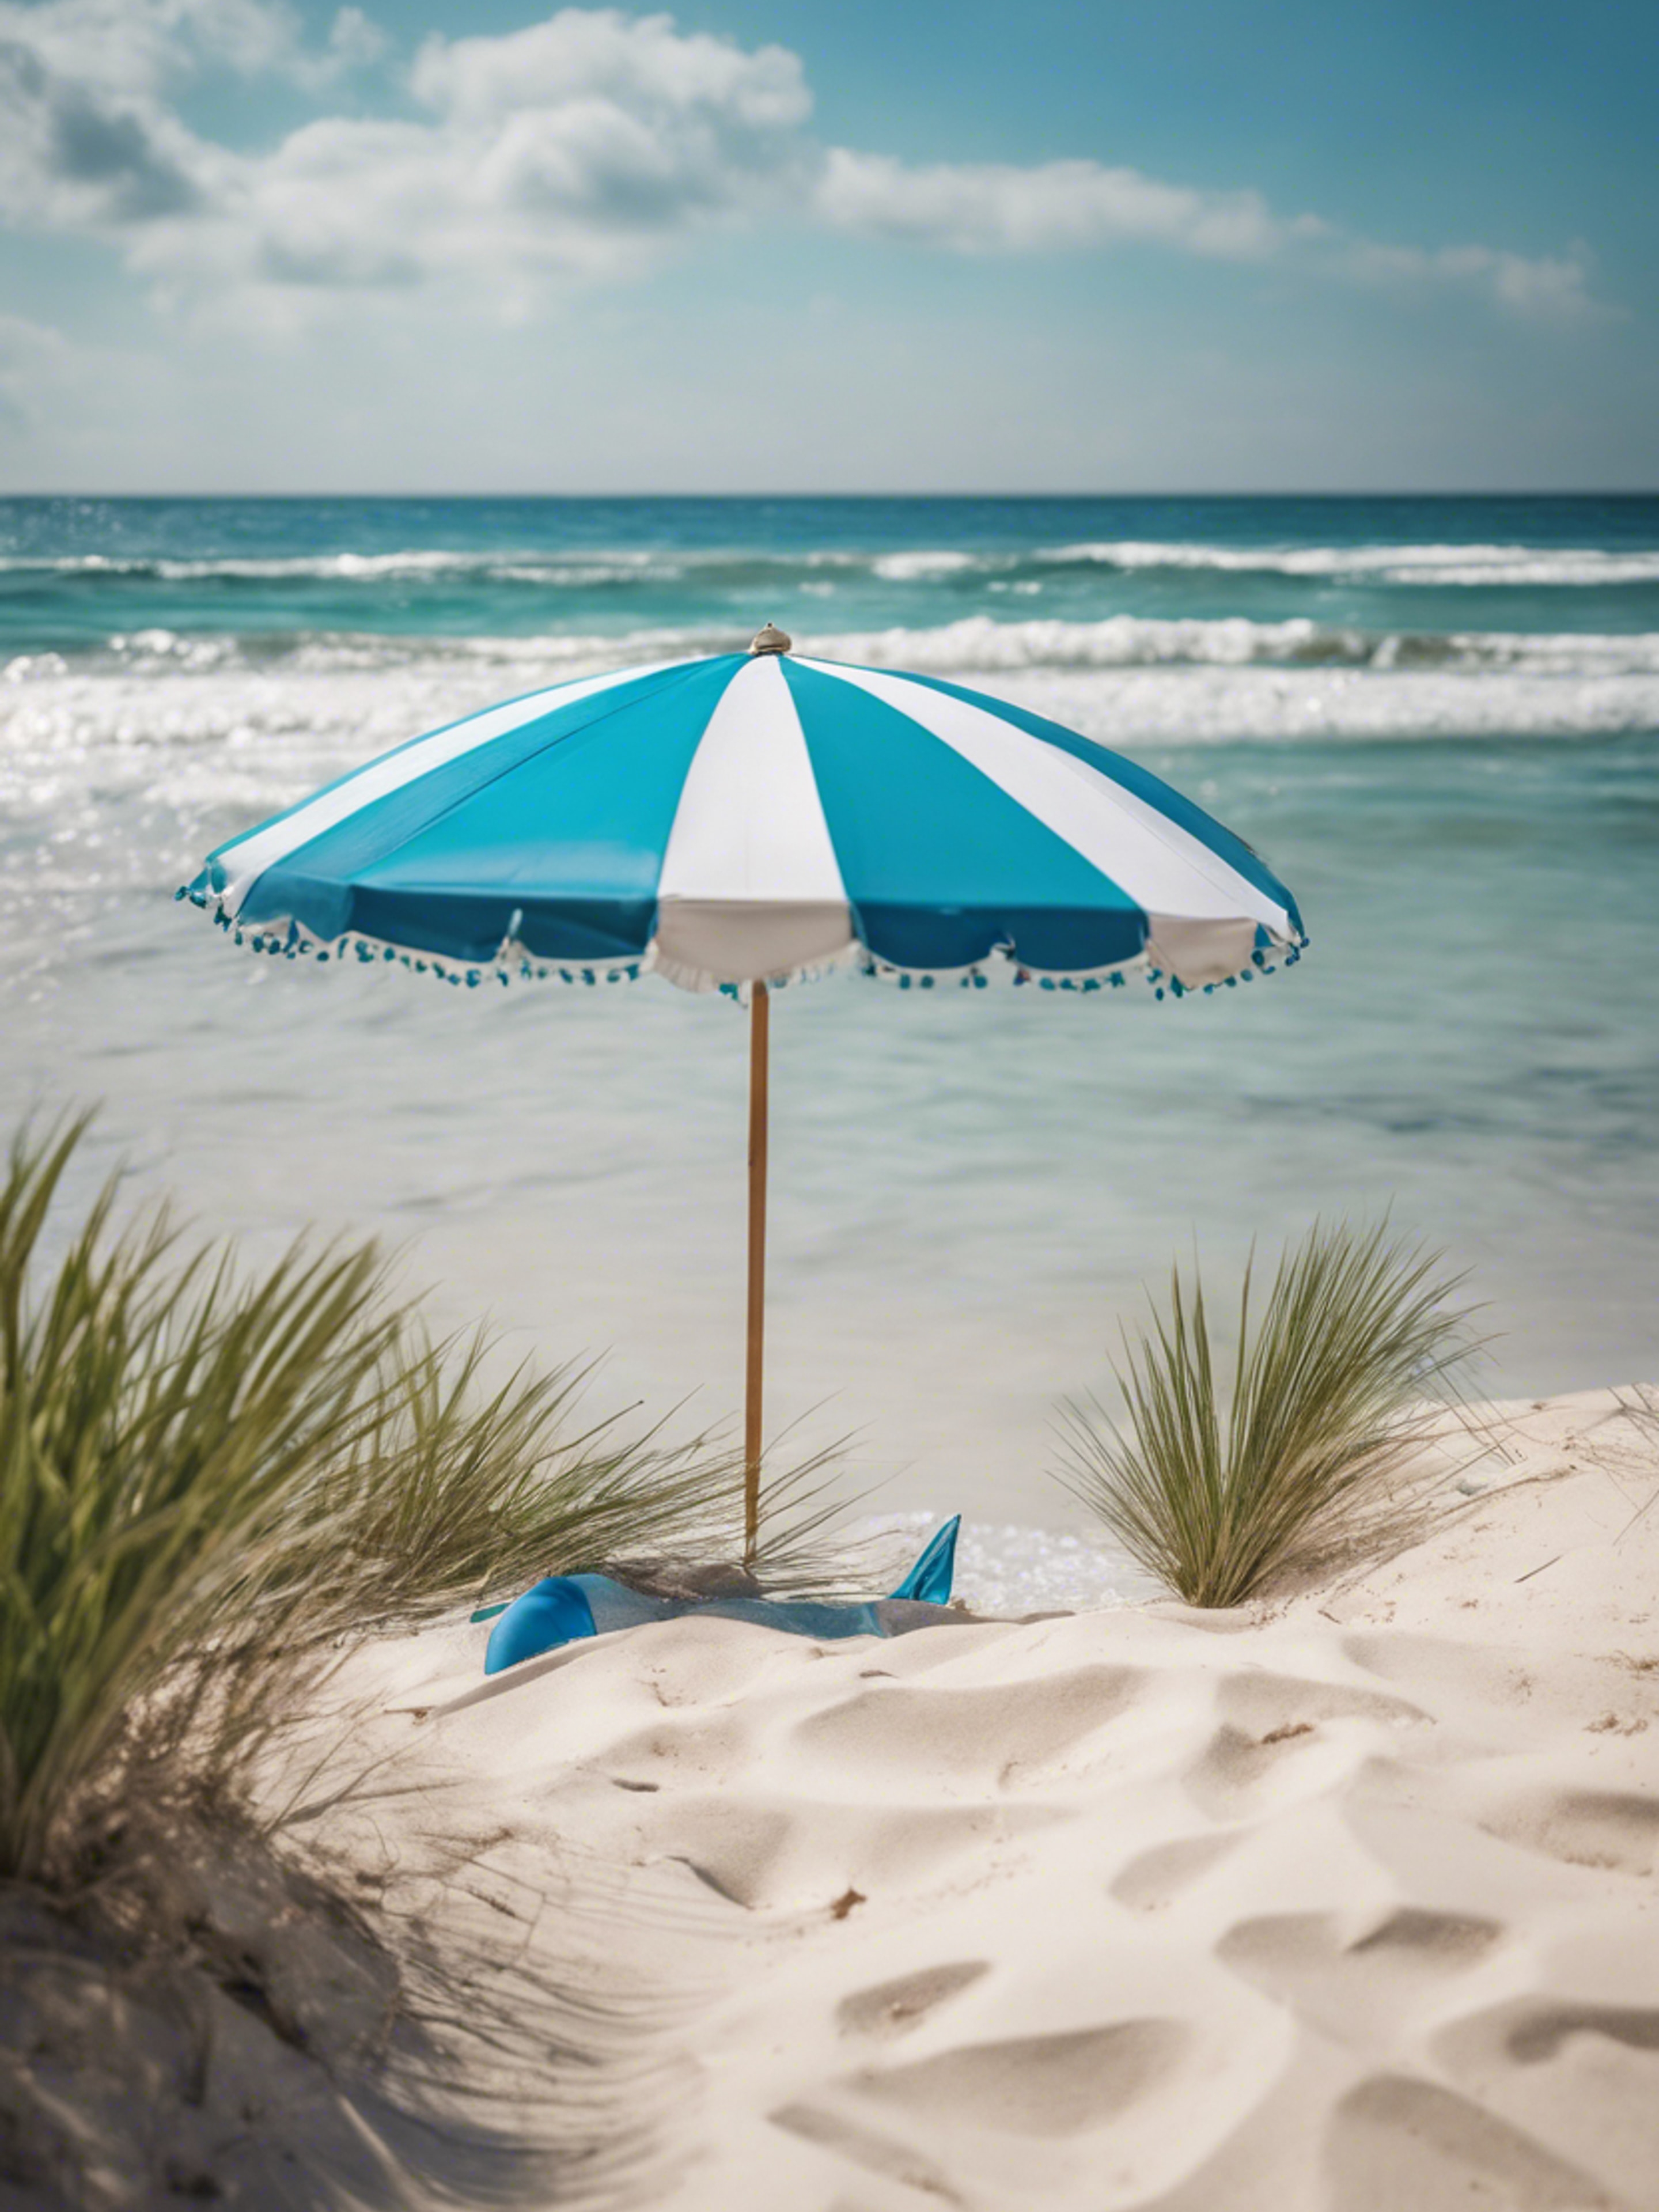 A scene at a beach, showing a blue and white striped beach umbrella, white sand, and turquoise sea beyond.壁紙[4f2cdd4fe2f04b5cb3be]